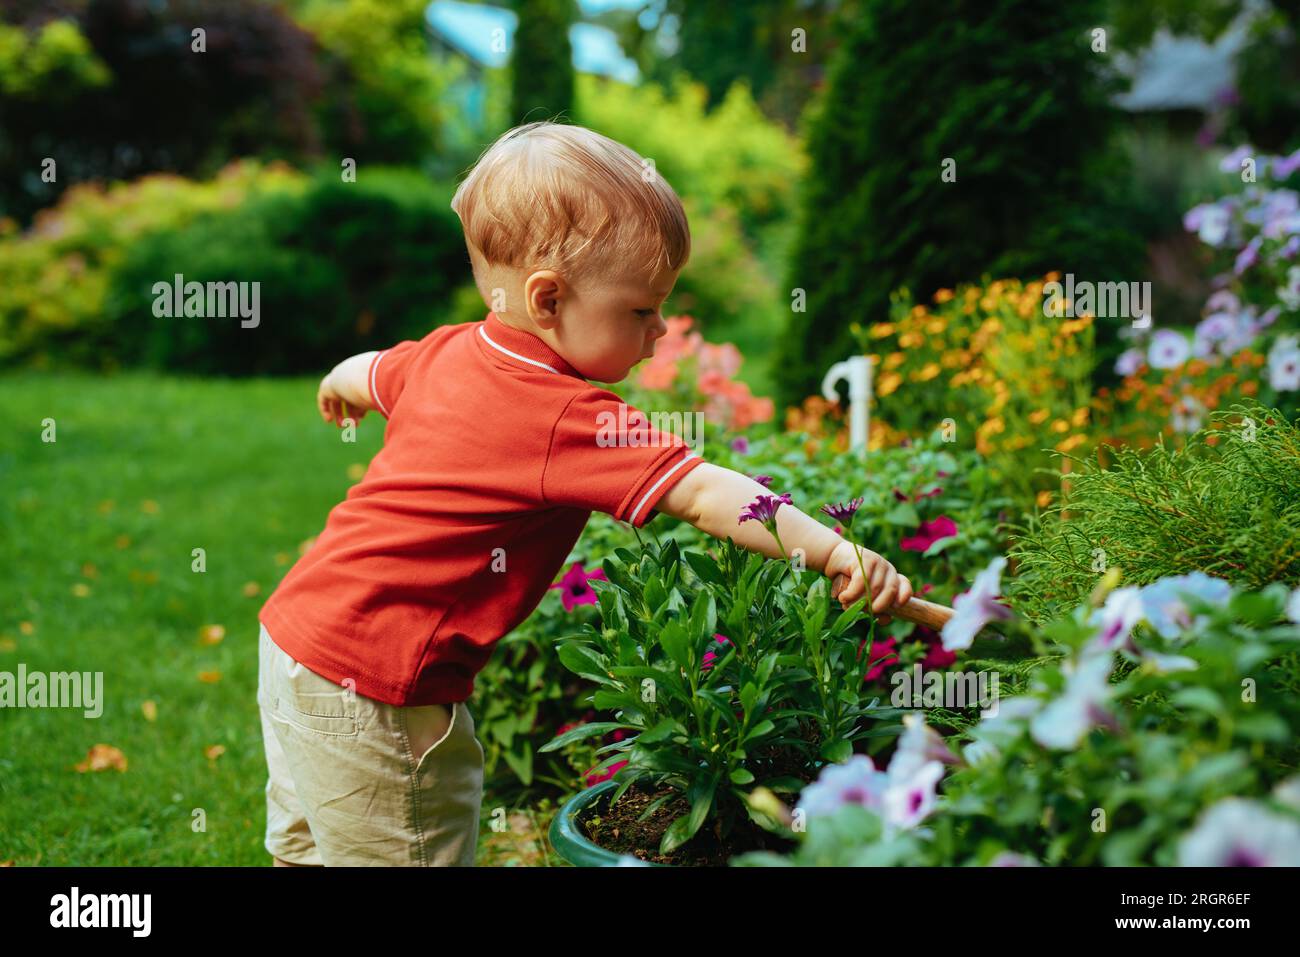 One year child care flowers in the garden Stock Photo